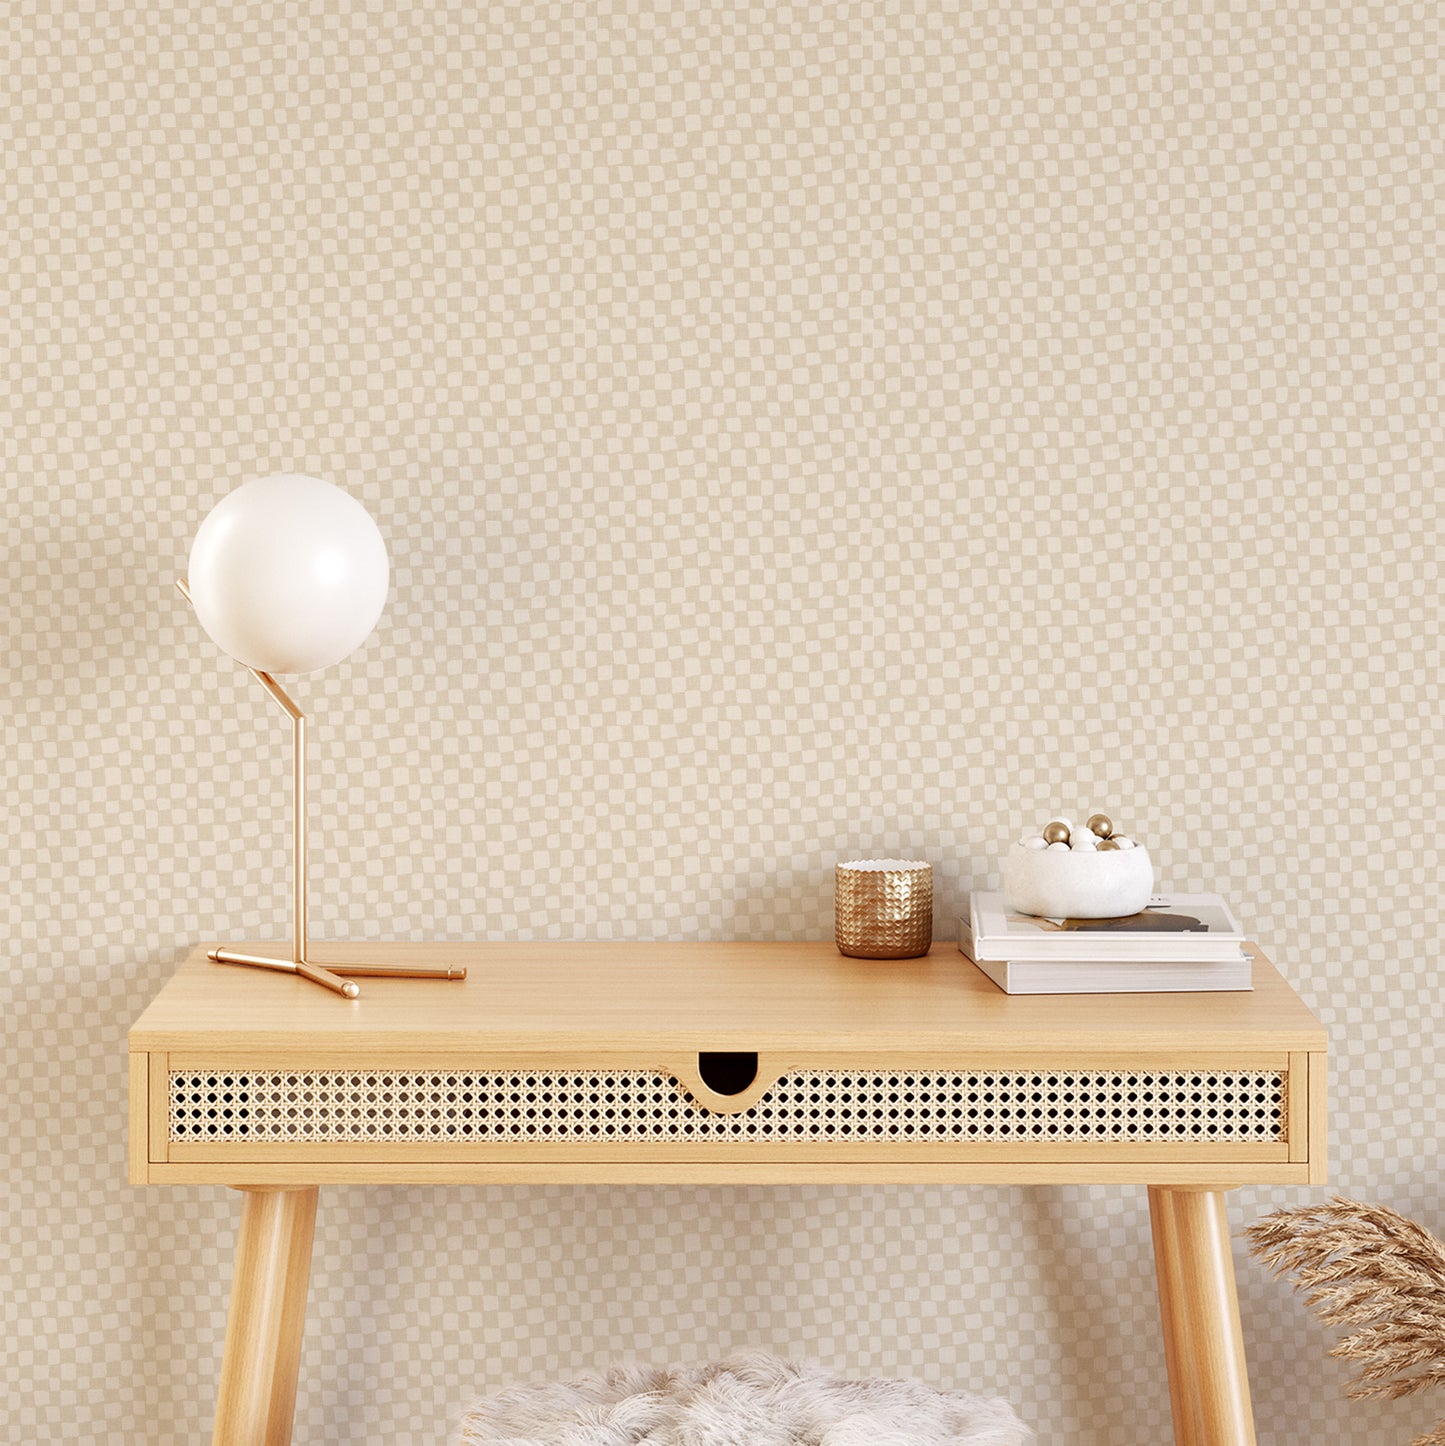 Transform your space with Lazy Checkers Wallpaper – Cream. Featuring playful, uneven visuals for a dynamic, three-dimensional look, this wallpaper can bring a sense of movement and energy to any room.